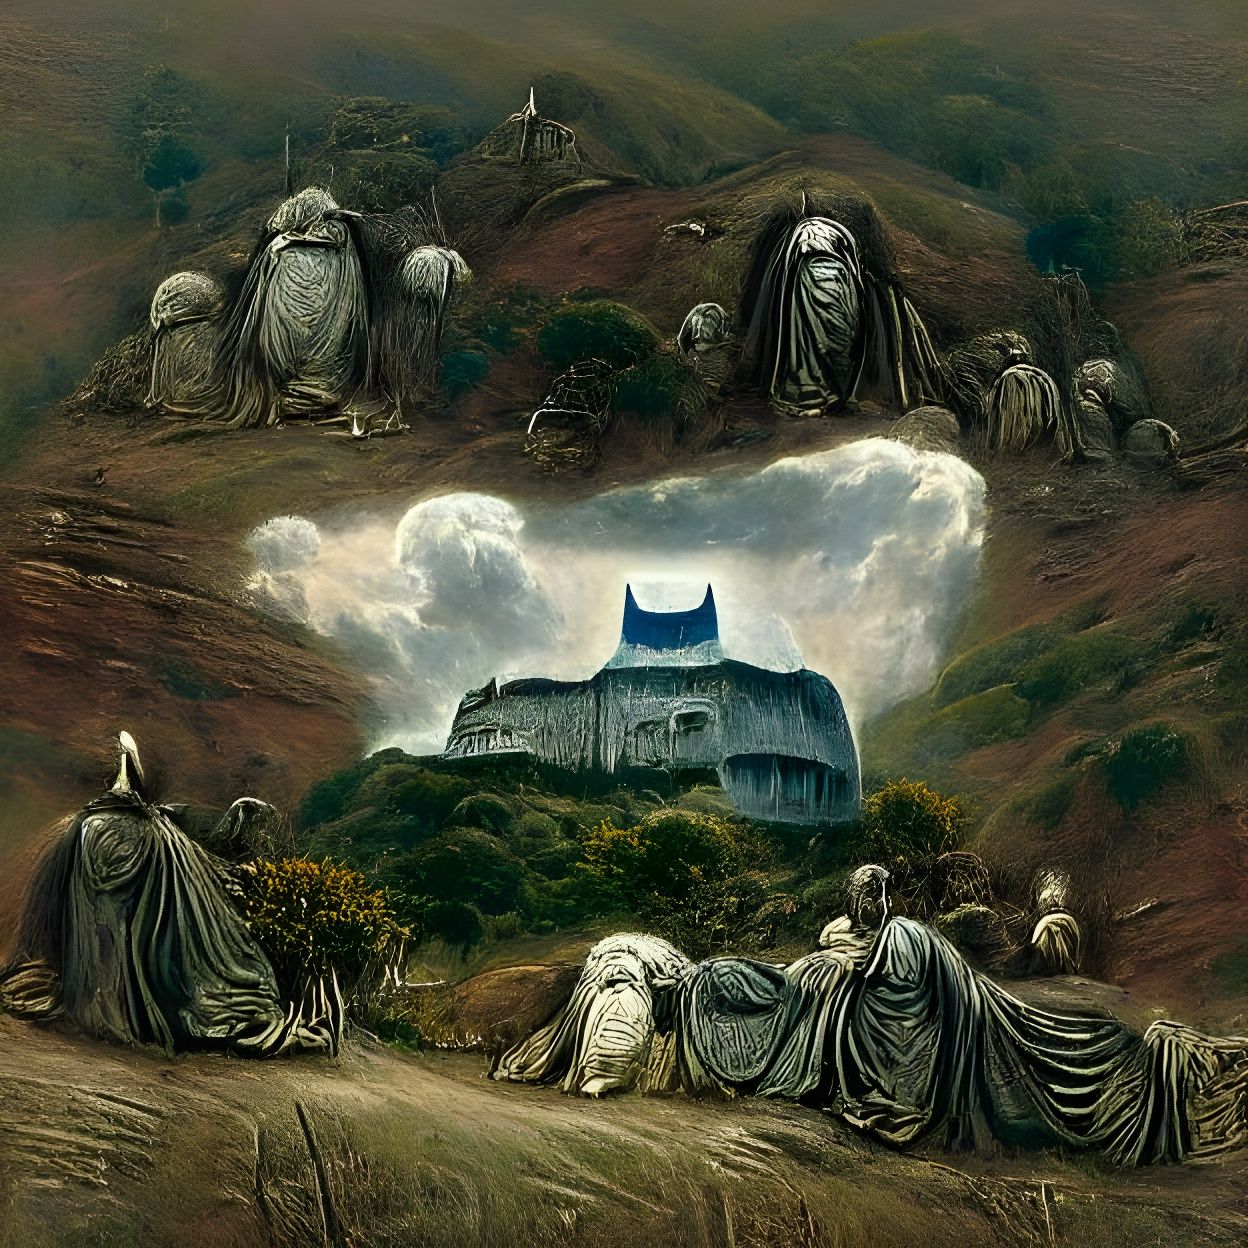 House on a hill